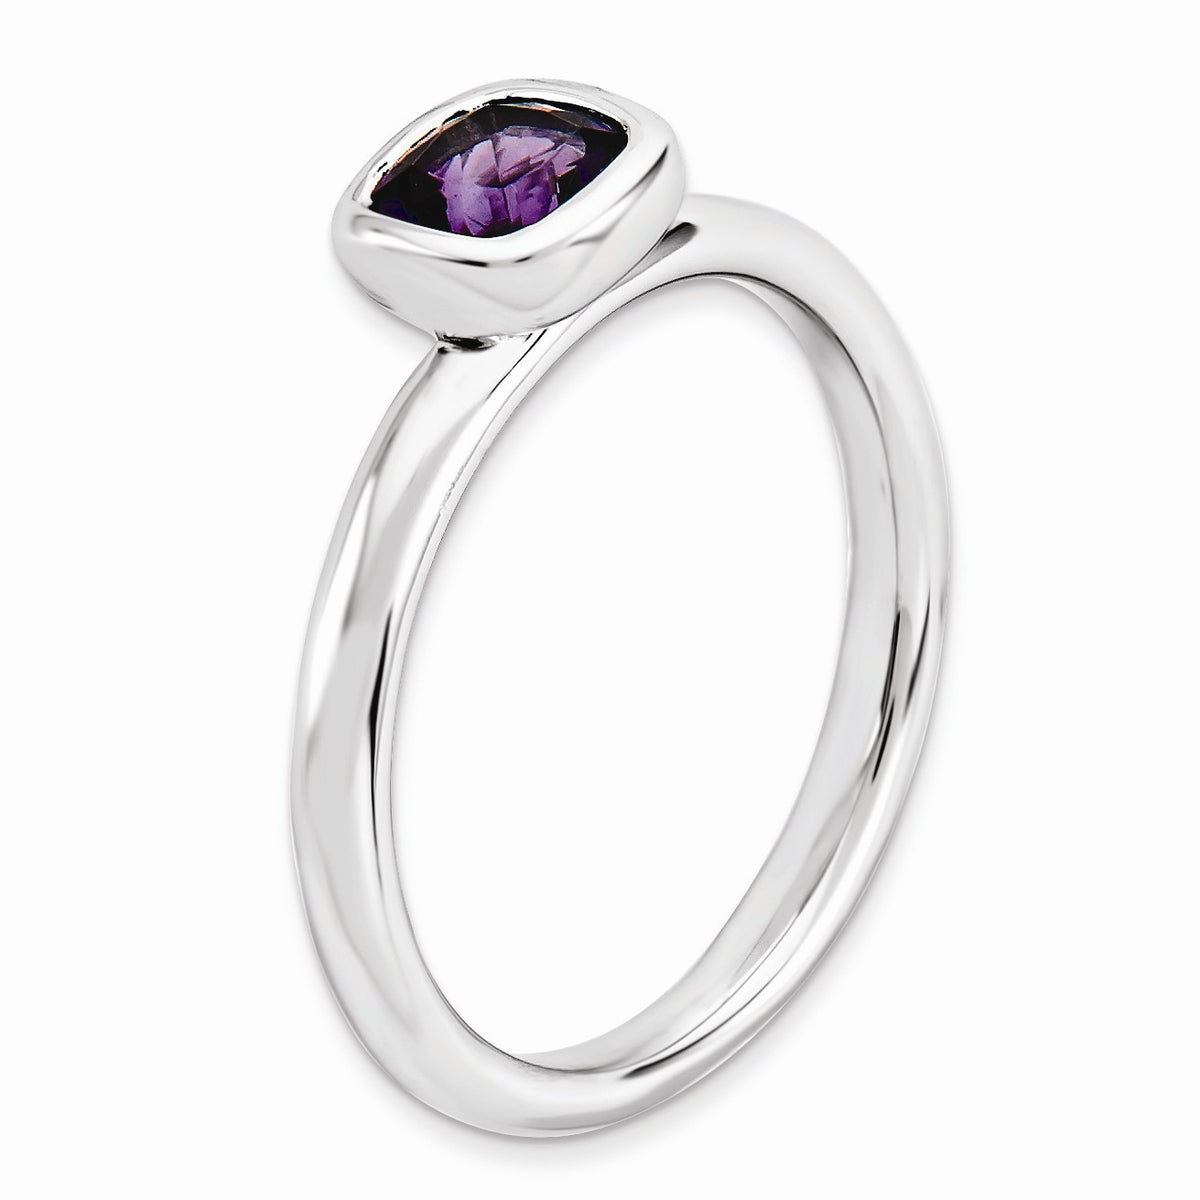 Alternate view of the Sterling Silver &amp; Amethyst Stackable 5mm Cushion Cut Solitaire Ring by The Black Bow Jewelry Co.